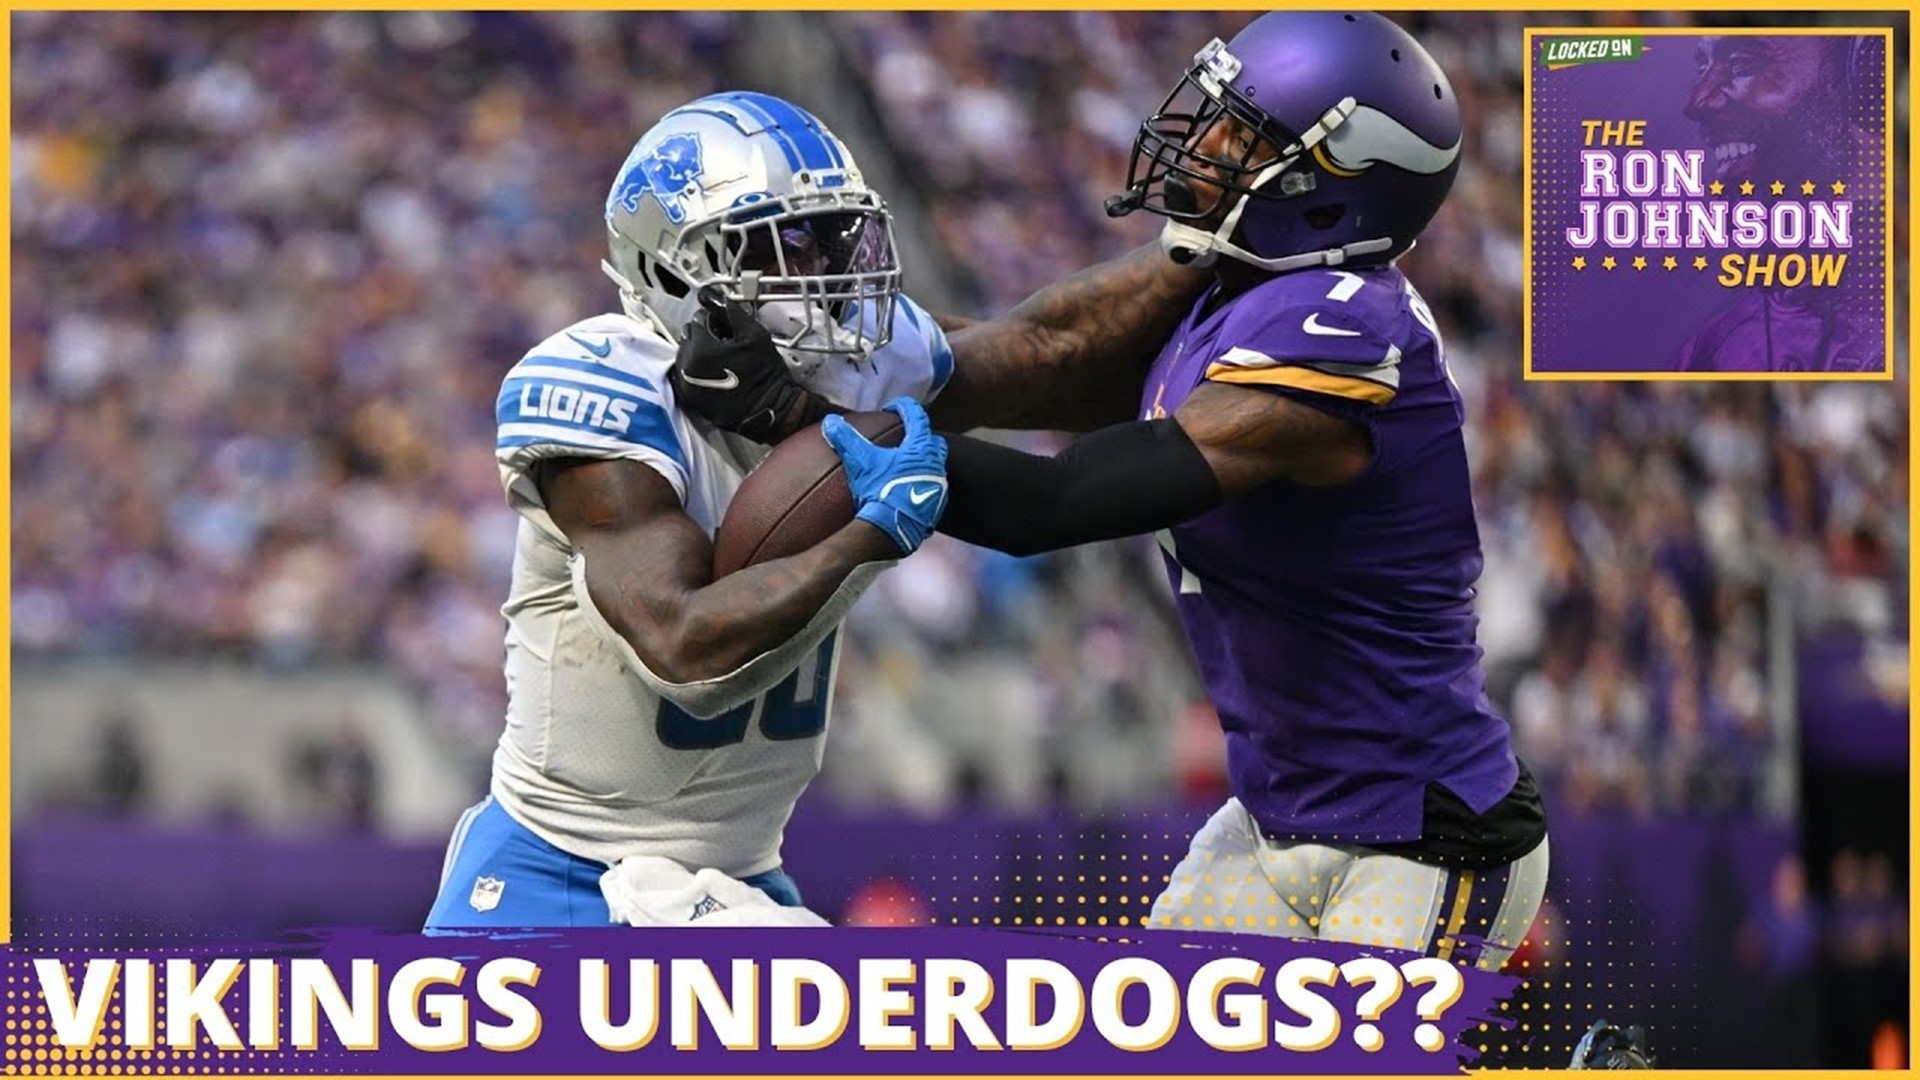 The Minnesota Vikings are underdogs against the Detroit Lions??? Ron Johnson is mystified by the line.